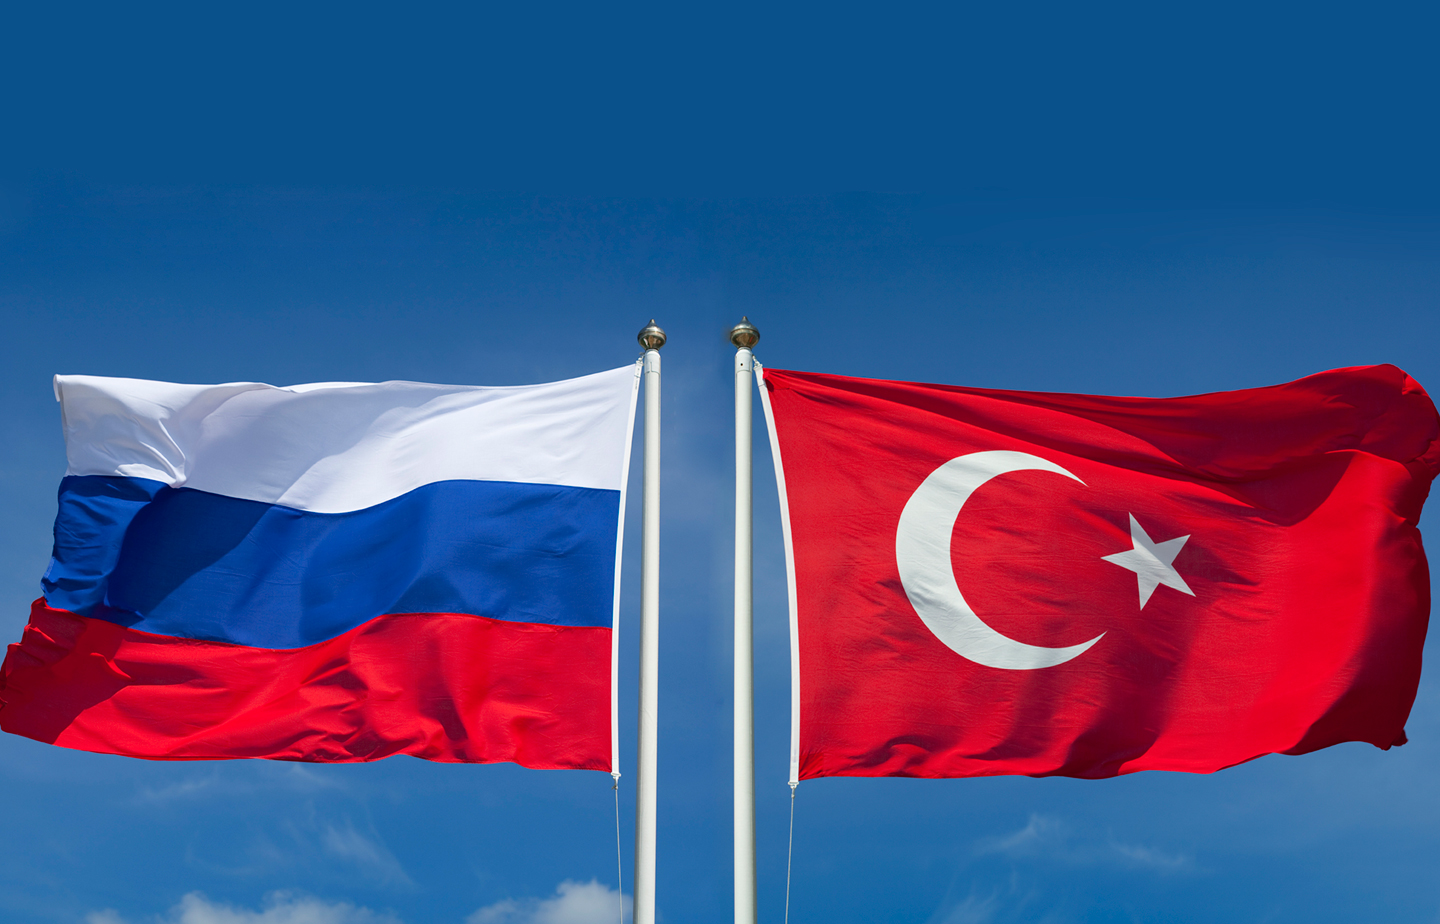 Turkey and Russia in the Black Sea Region: Dynamics of Cooperation and Conflict - Edam